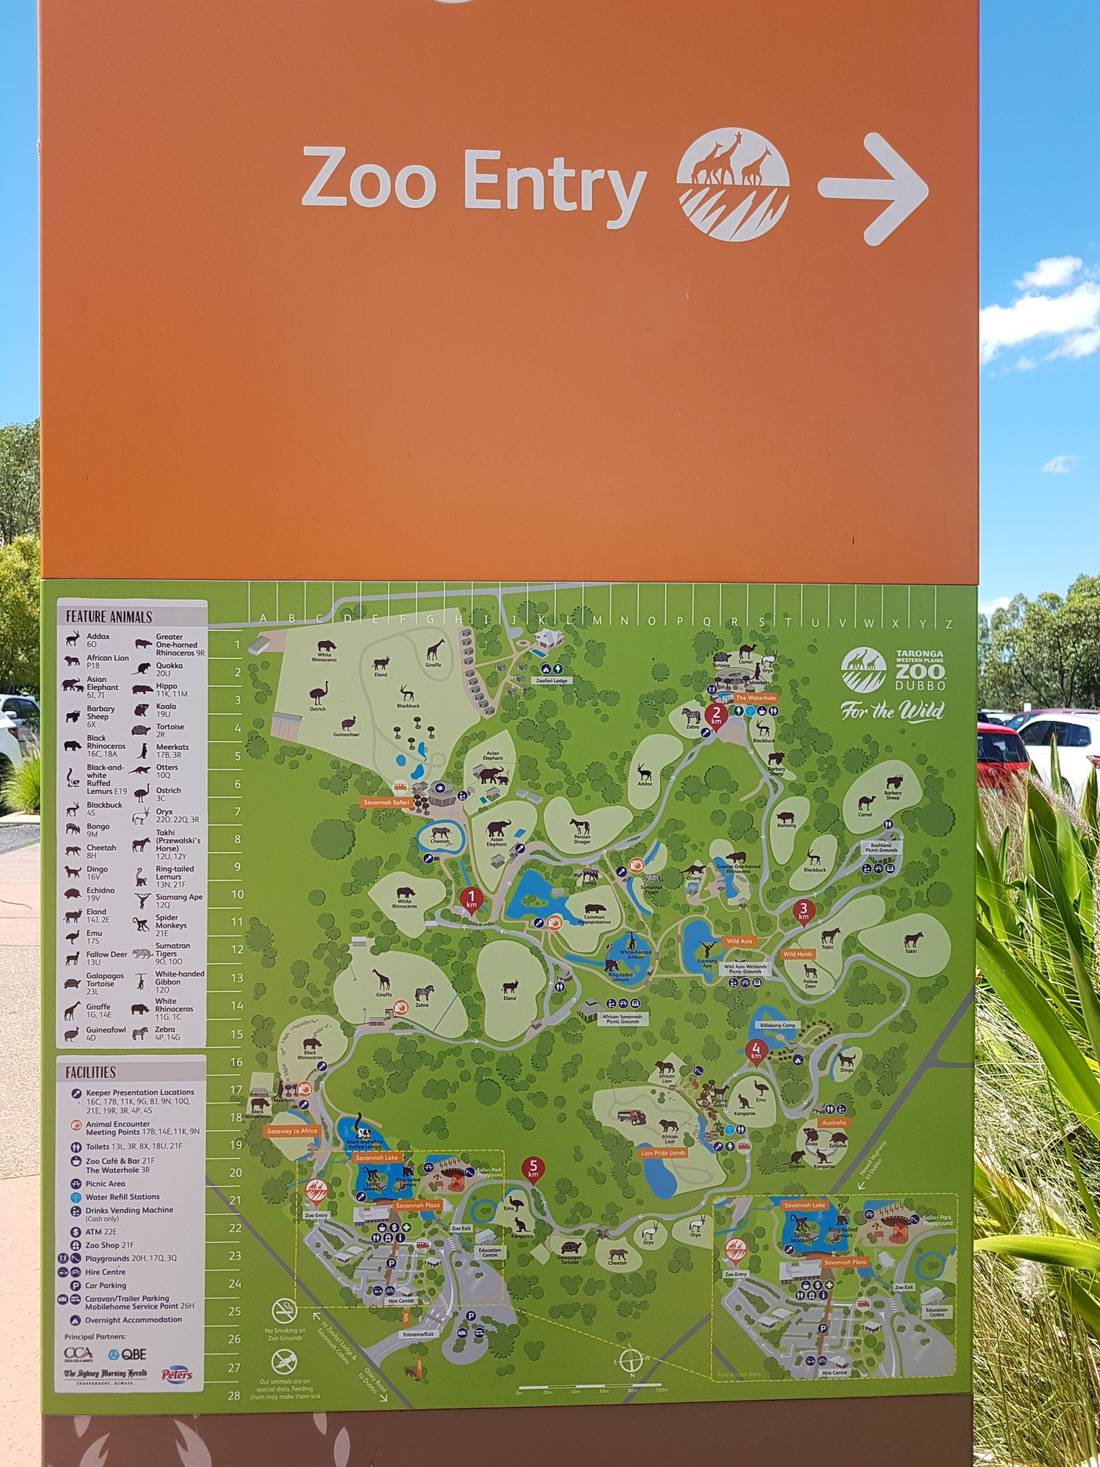 Taronga Western Plains Zoo, Dubbo (site map by the Zoo).